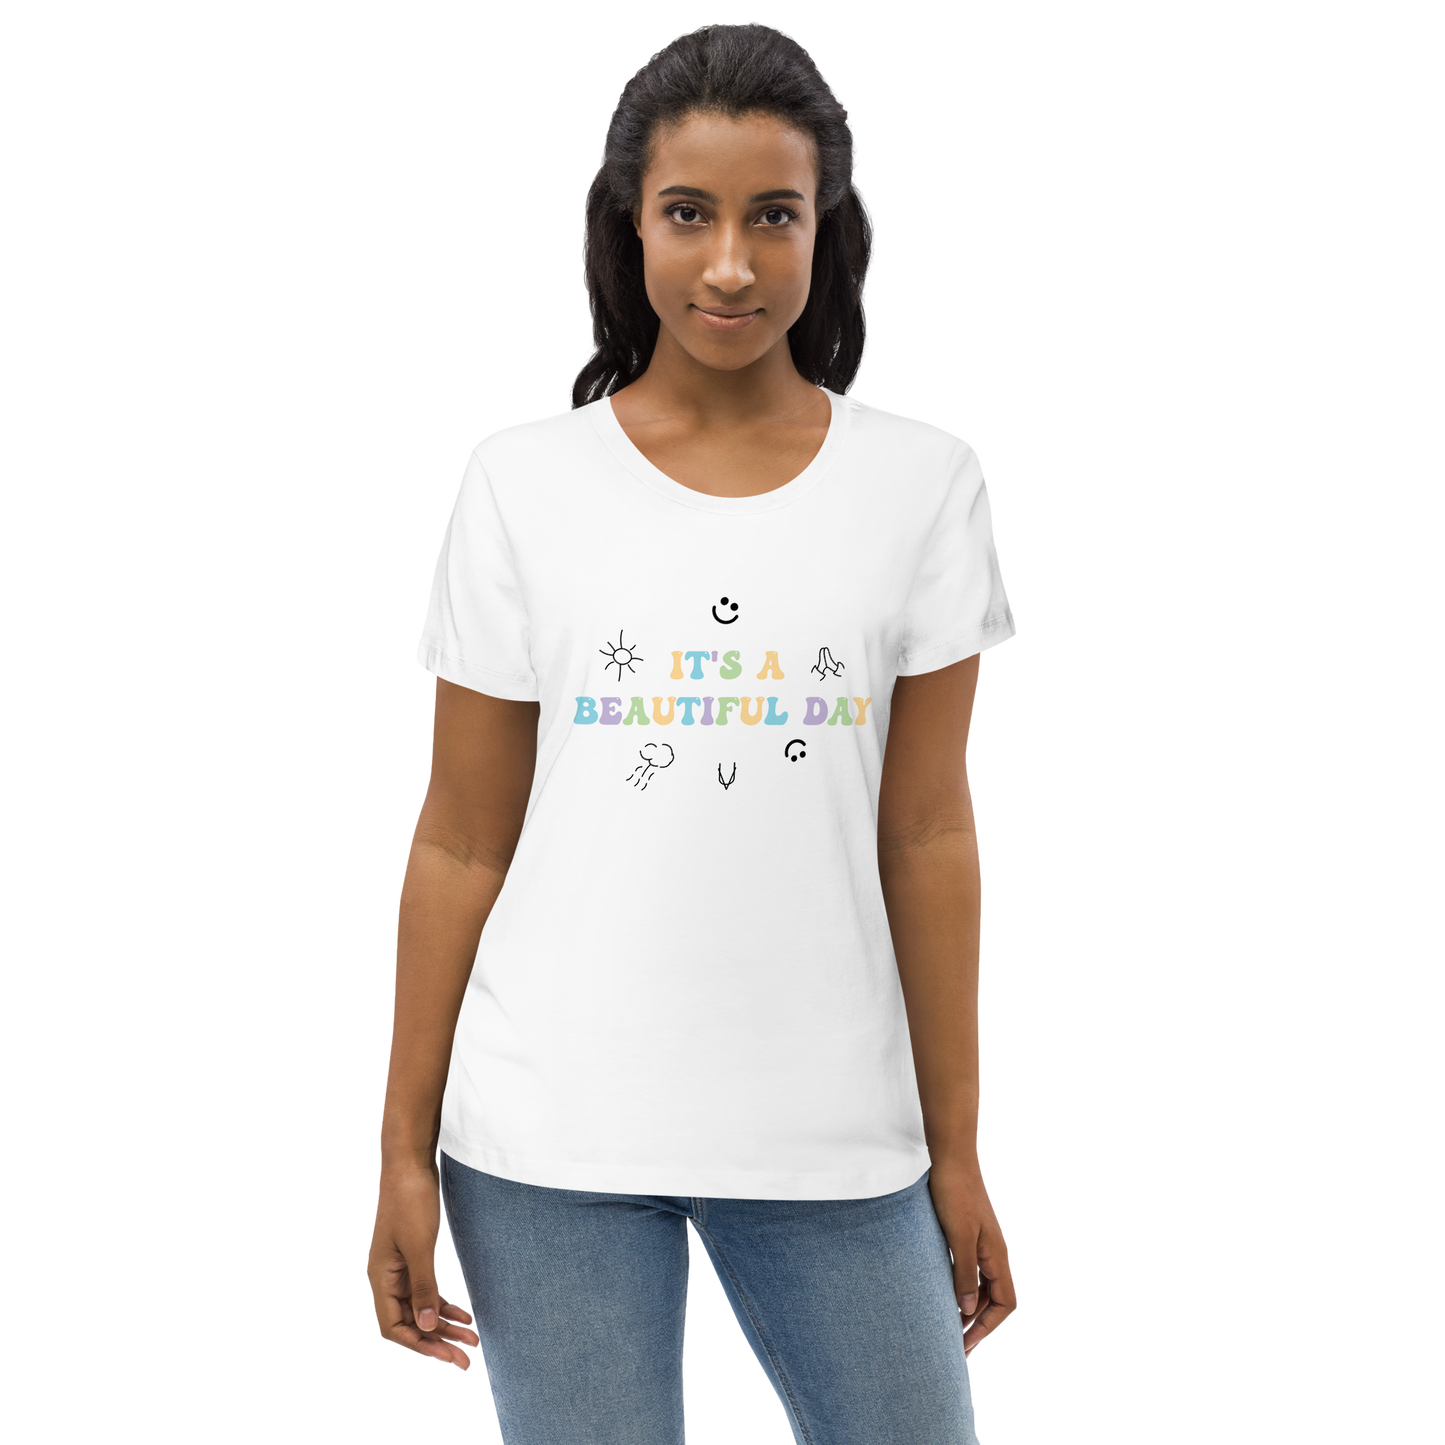 "It's A Beautiful Day" Women's Fitted Eco Tee